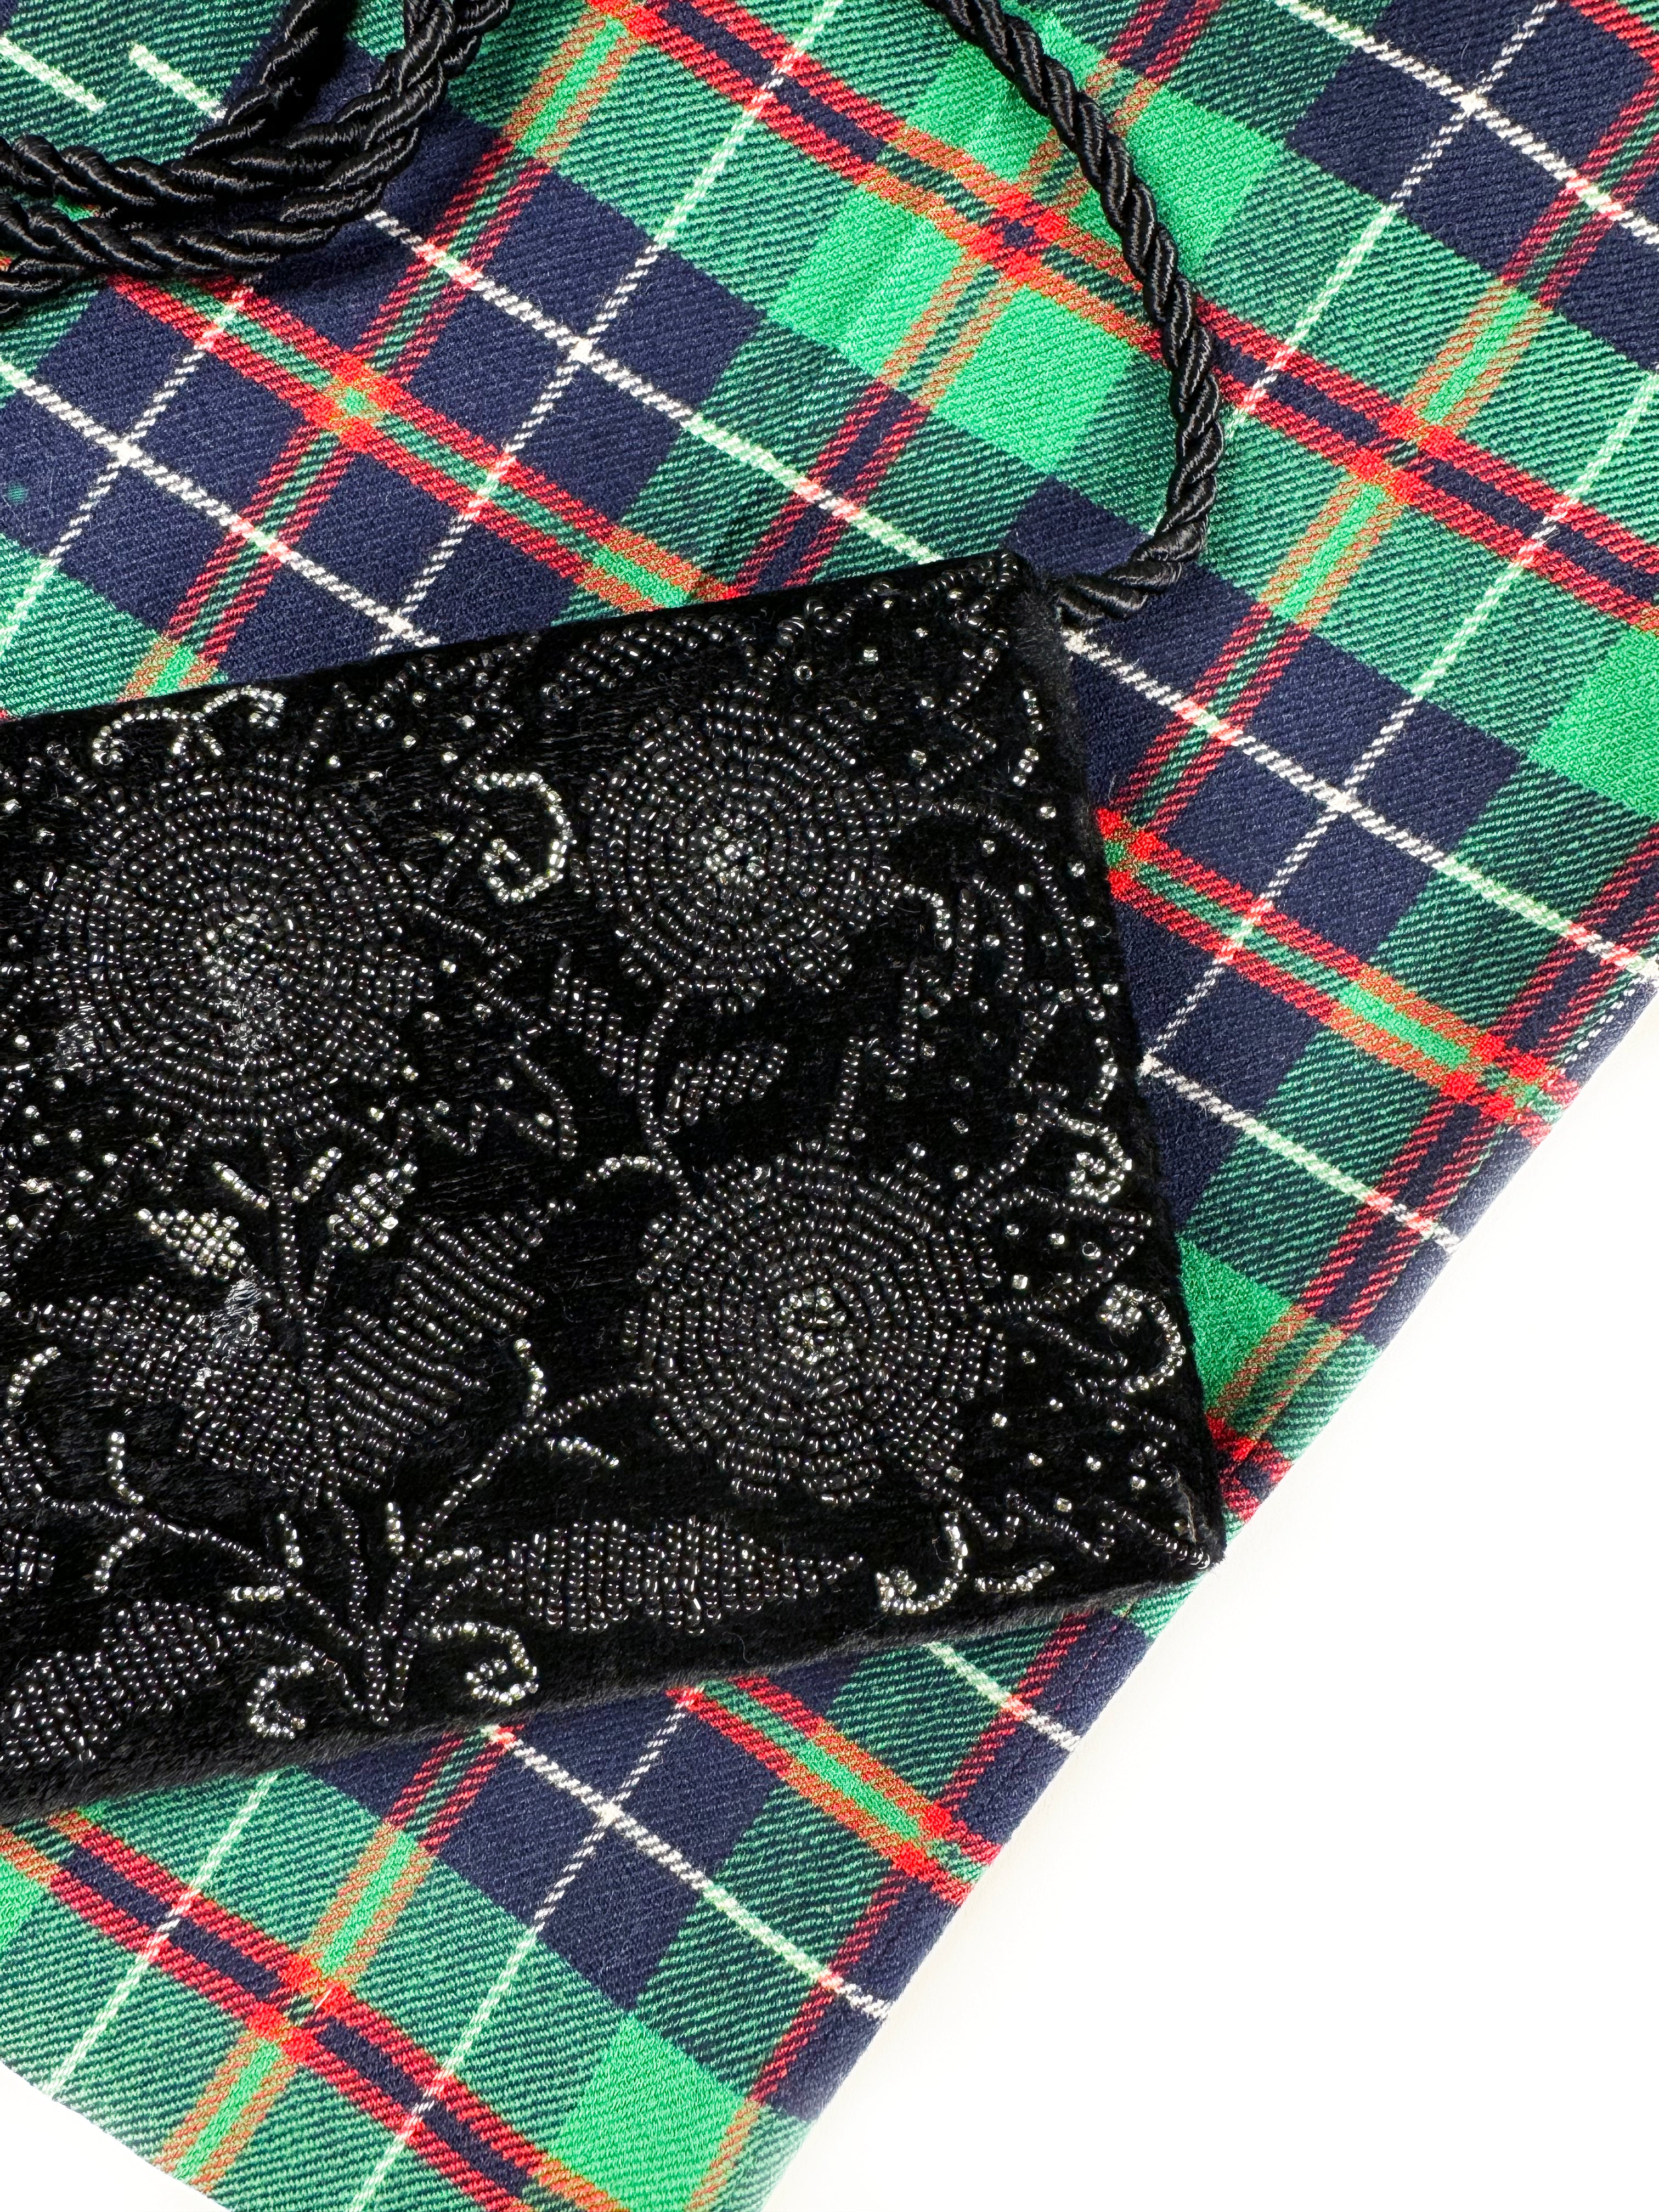 Black Beaded Purse - Late to the Party